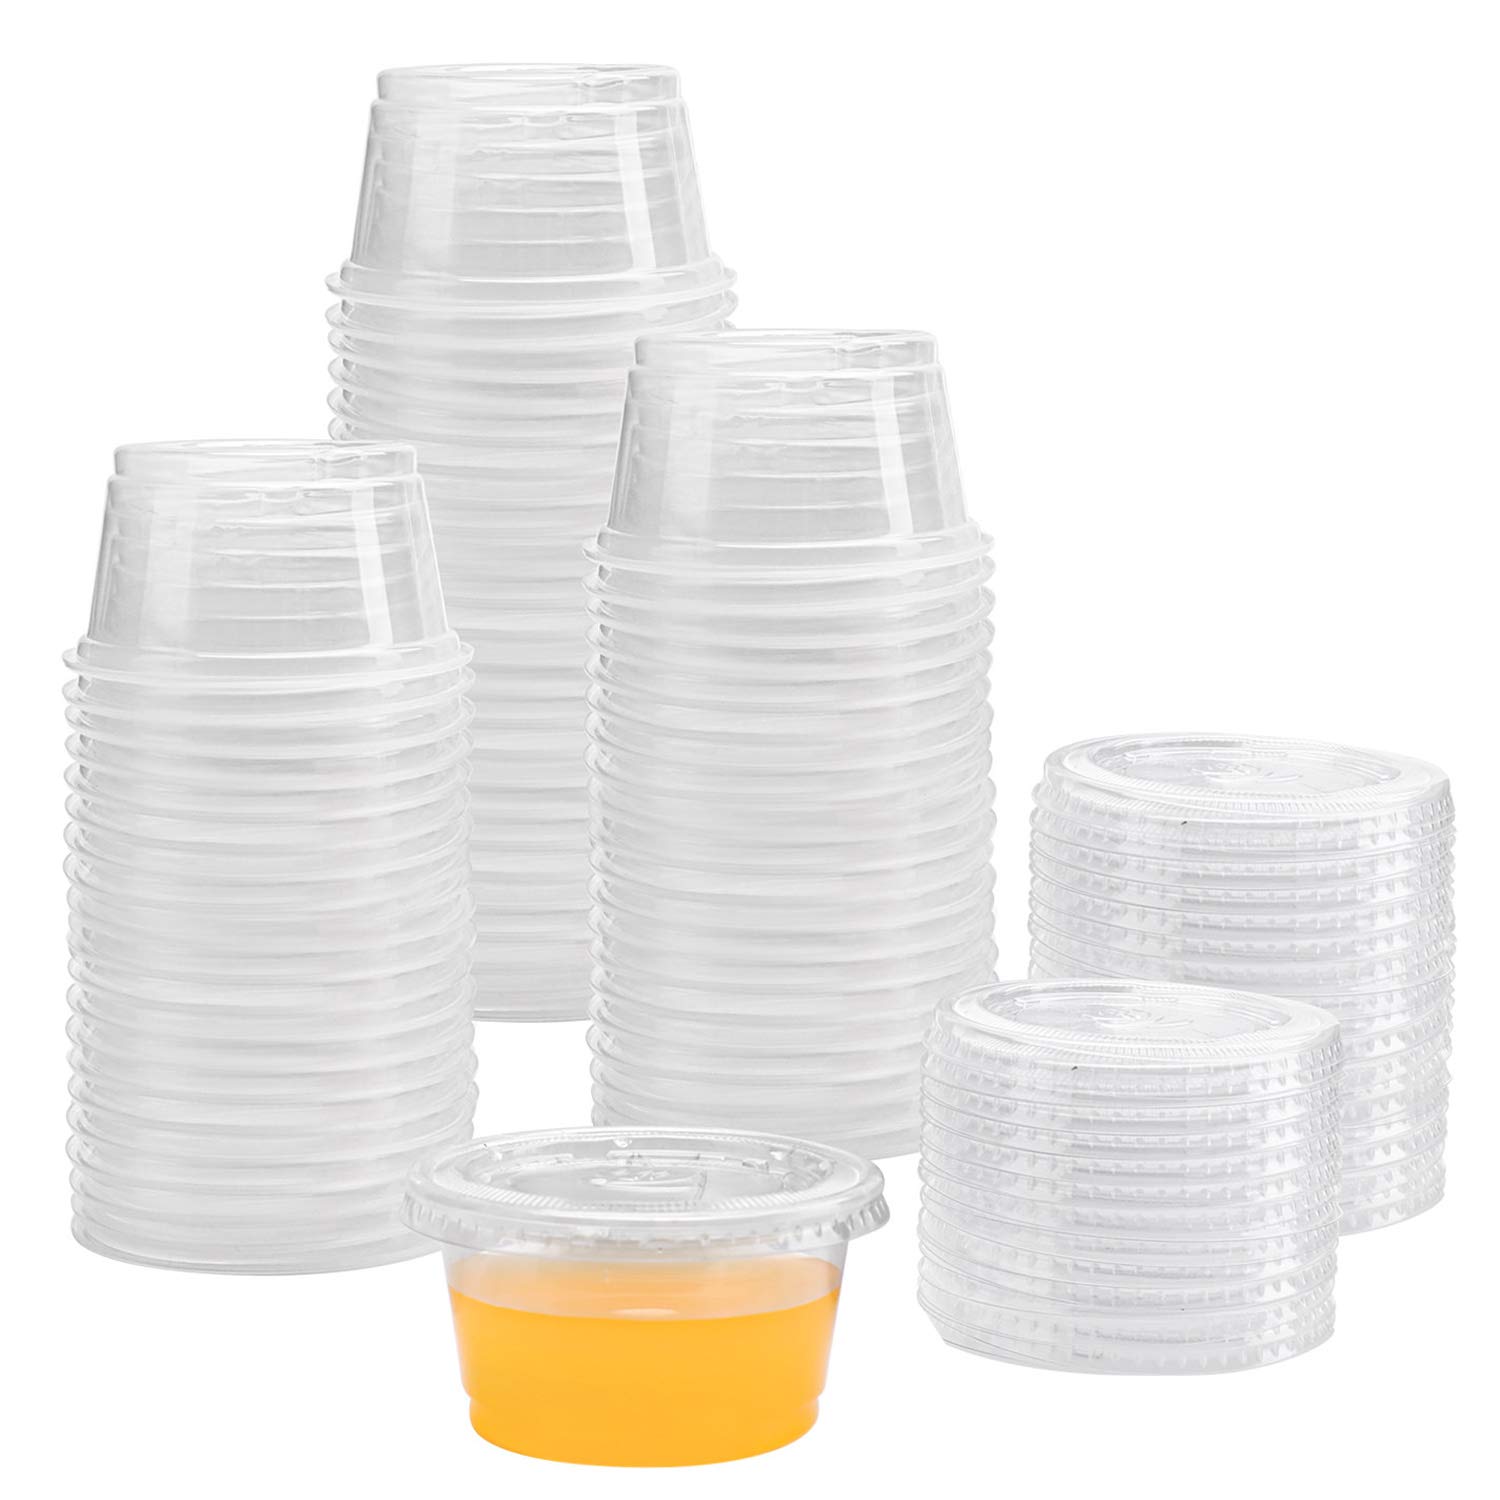 Disposable Portion Cups With Lids - - Perfect For Meal Prep